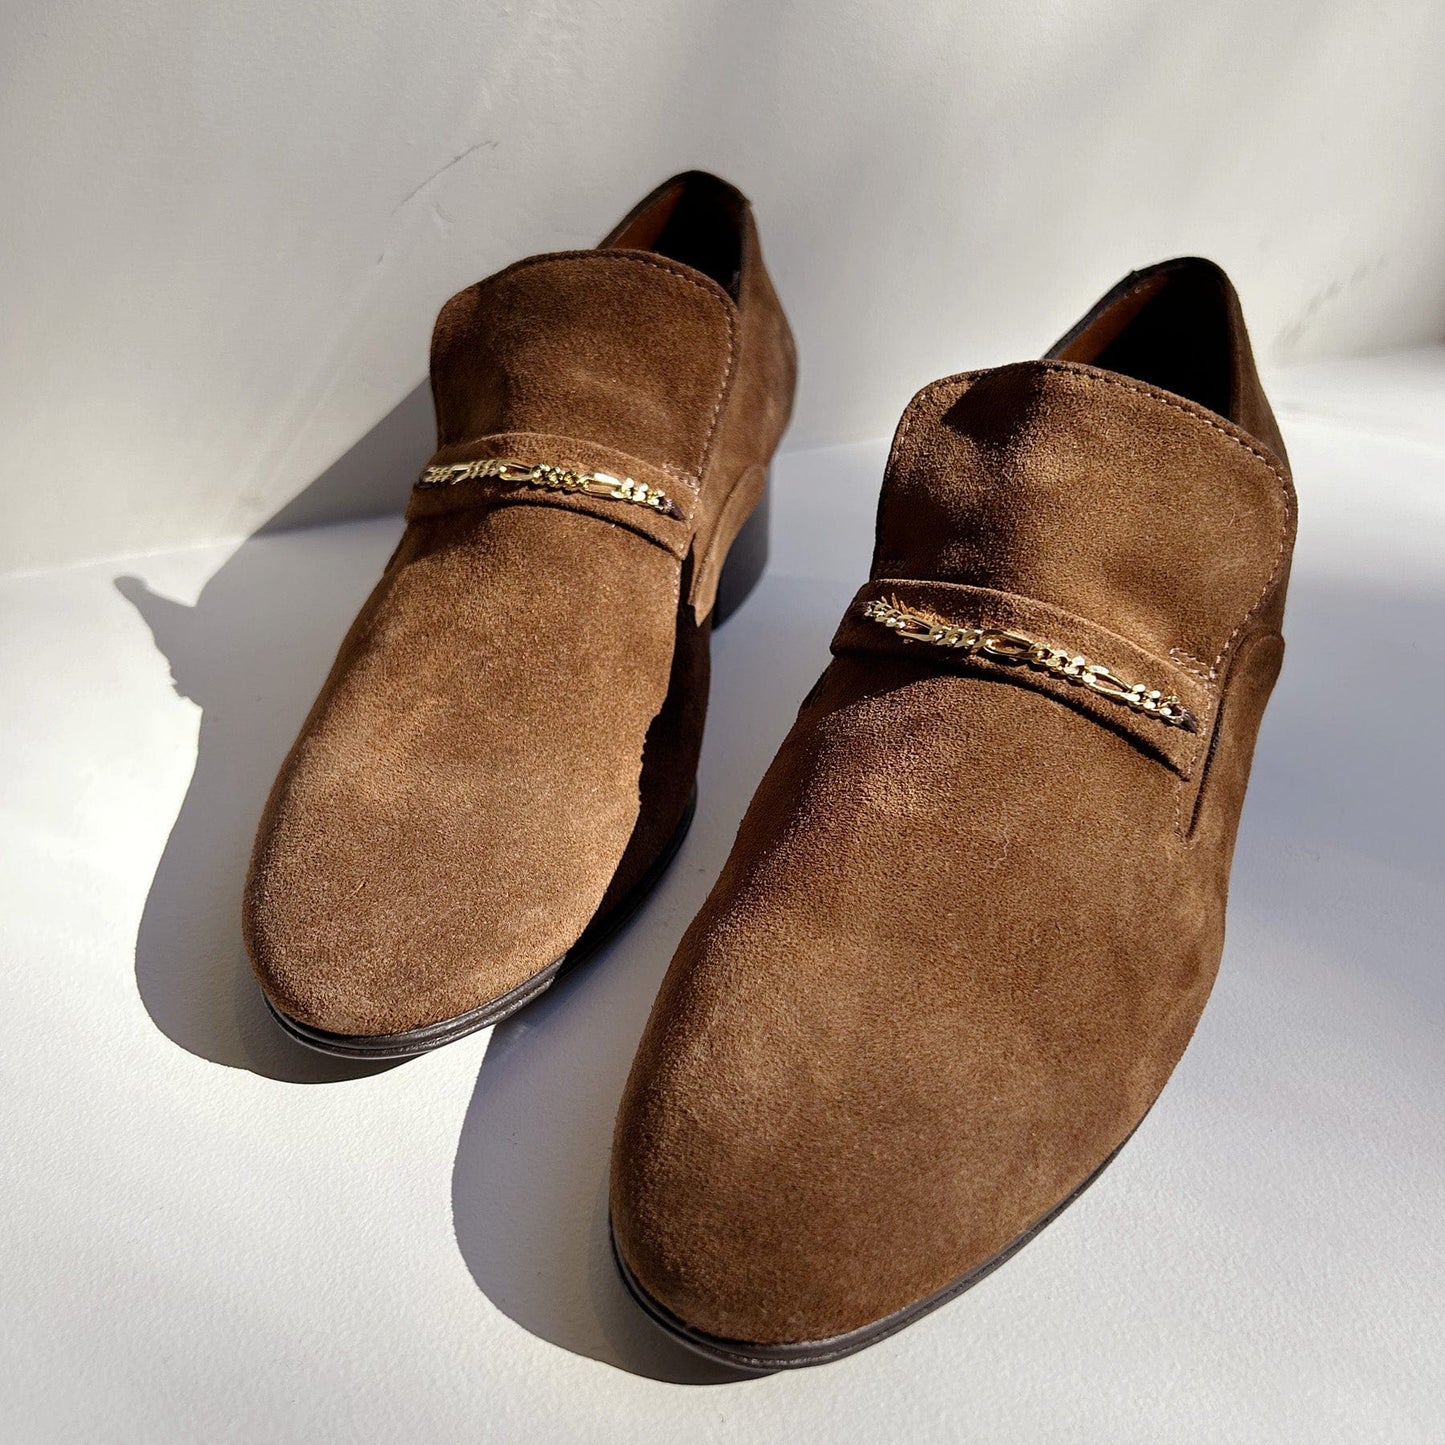 Montana Loafer in Chestnut Suede Shoes Anne Thomas   